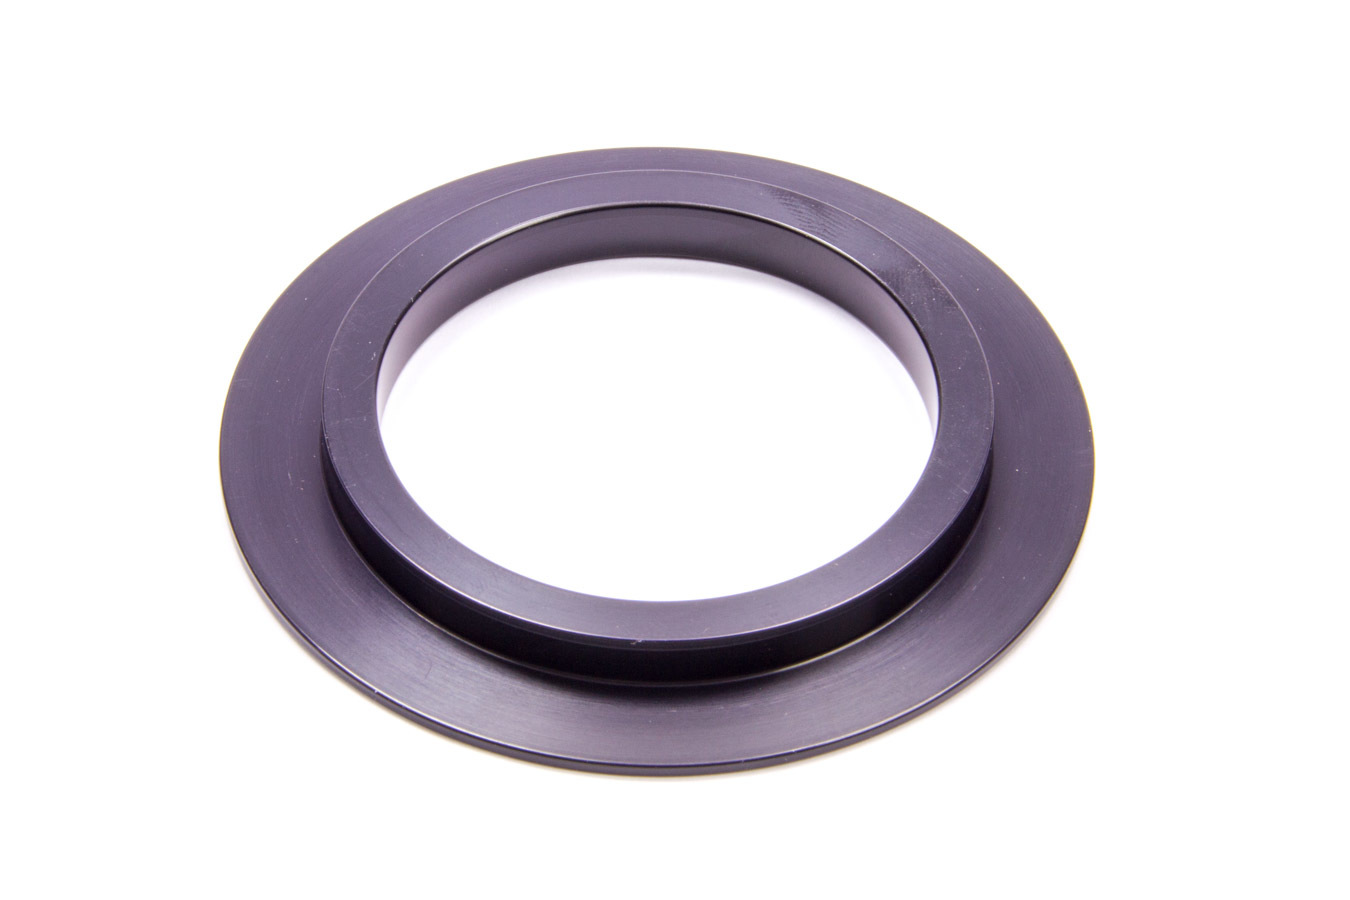 Peterson Fluid 05-1633 Pulley Flange, Press Fit, 1 or 1-1/2 in Wide Pulleys, Aluminum, Black Anodized, Peterson Pulleys, Each